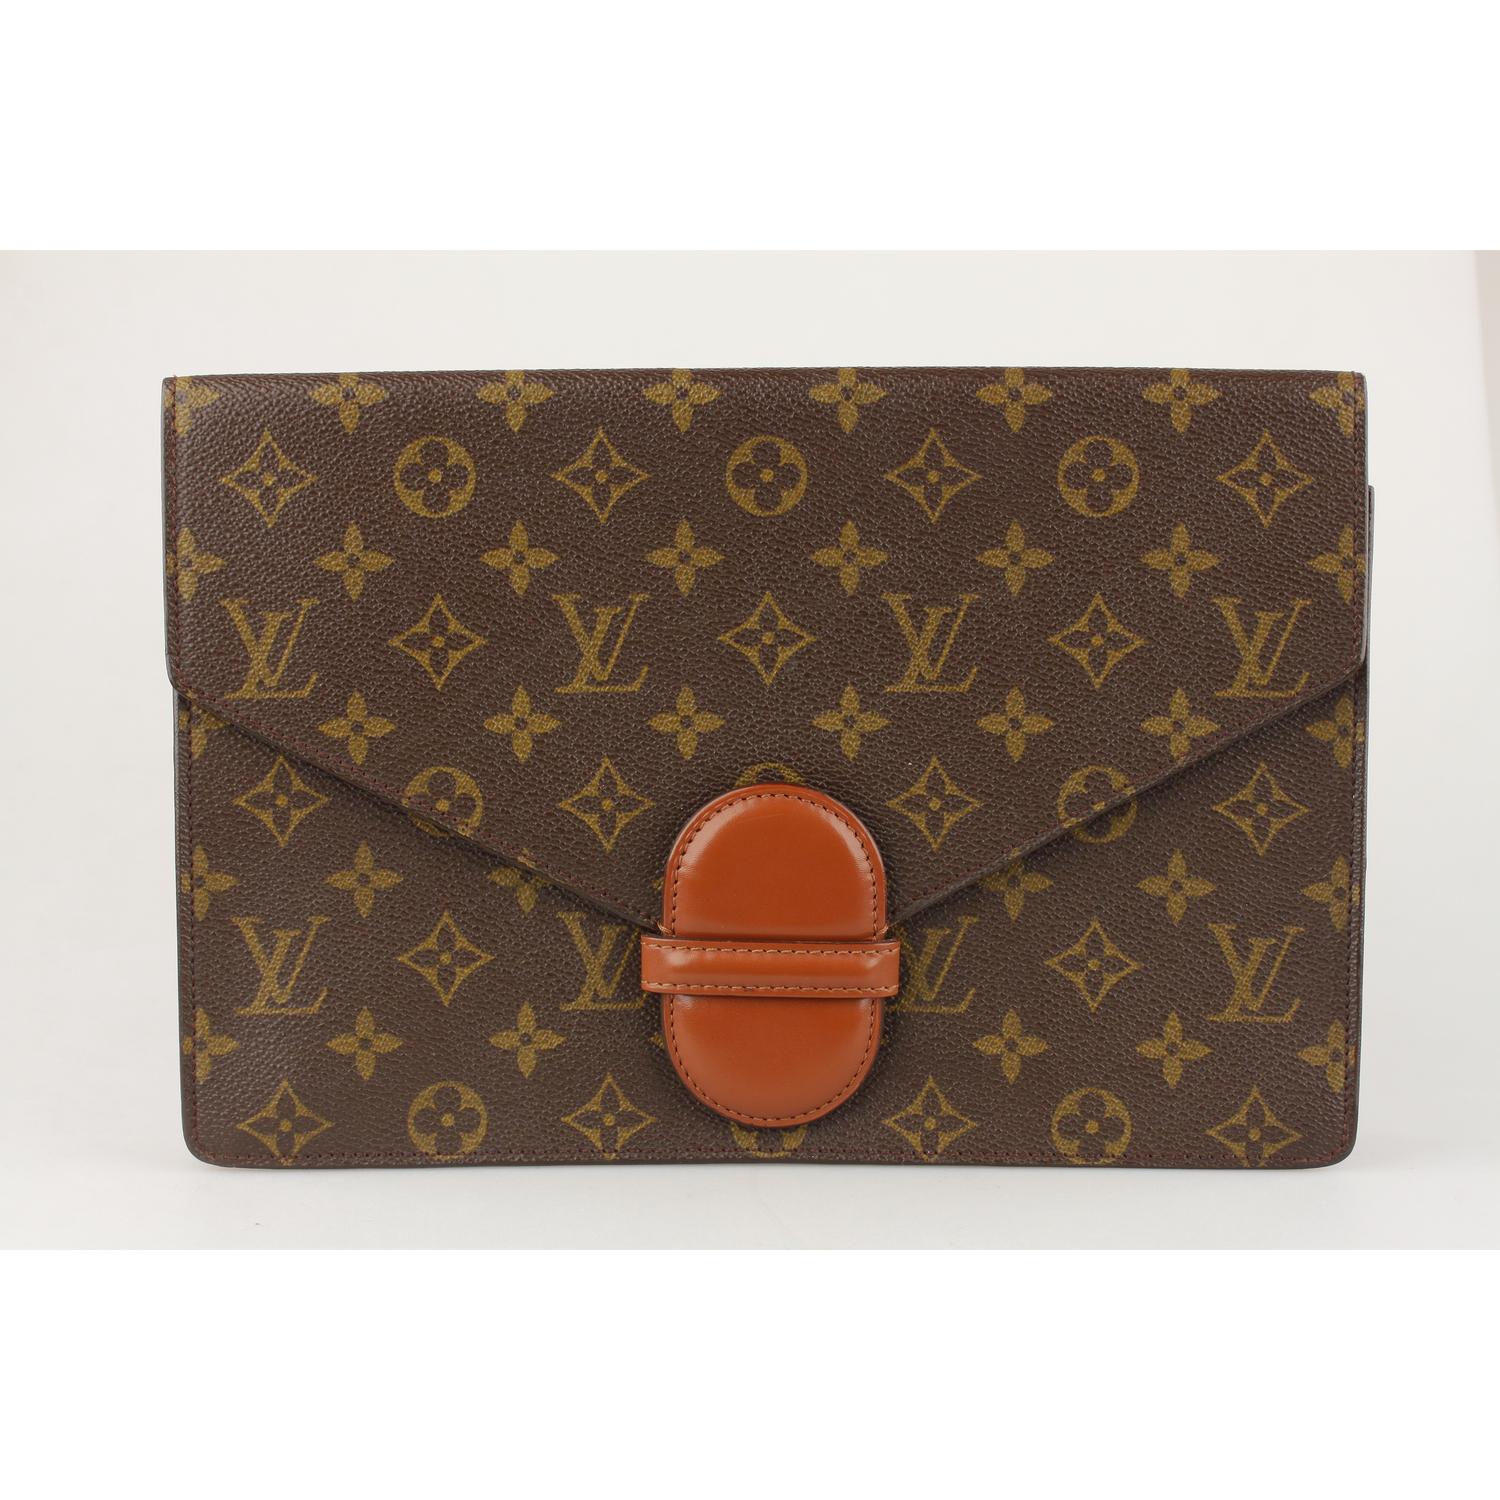 Louis Vuitton Vintage Monogram Canvas Ranelagh Clutch Bag

Material: Canvas
Color: Brown
Model: Ranelagh
Gender: Women
Country of Manufacture: France
Size: Small
Bag Depth: 1.5 inches - 3,8 cm 
Bag Height: 7.5 inches - 19 cm 
Bag Length: 11 inches -